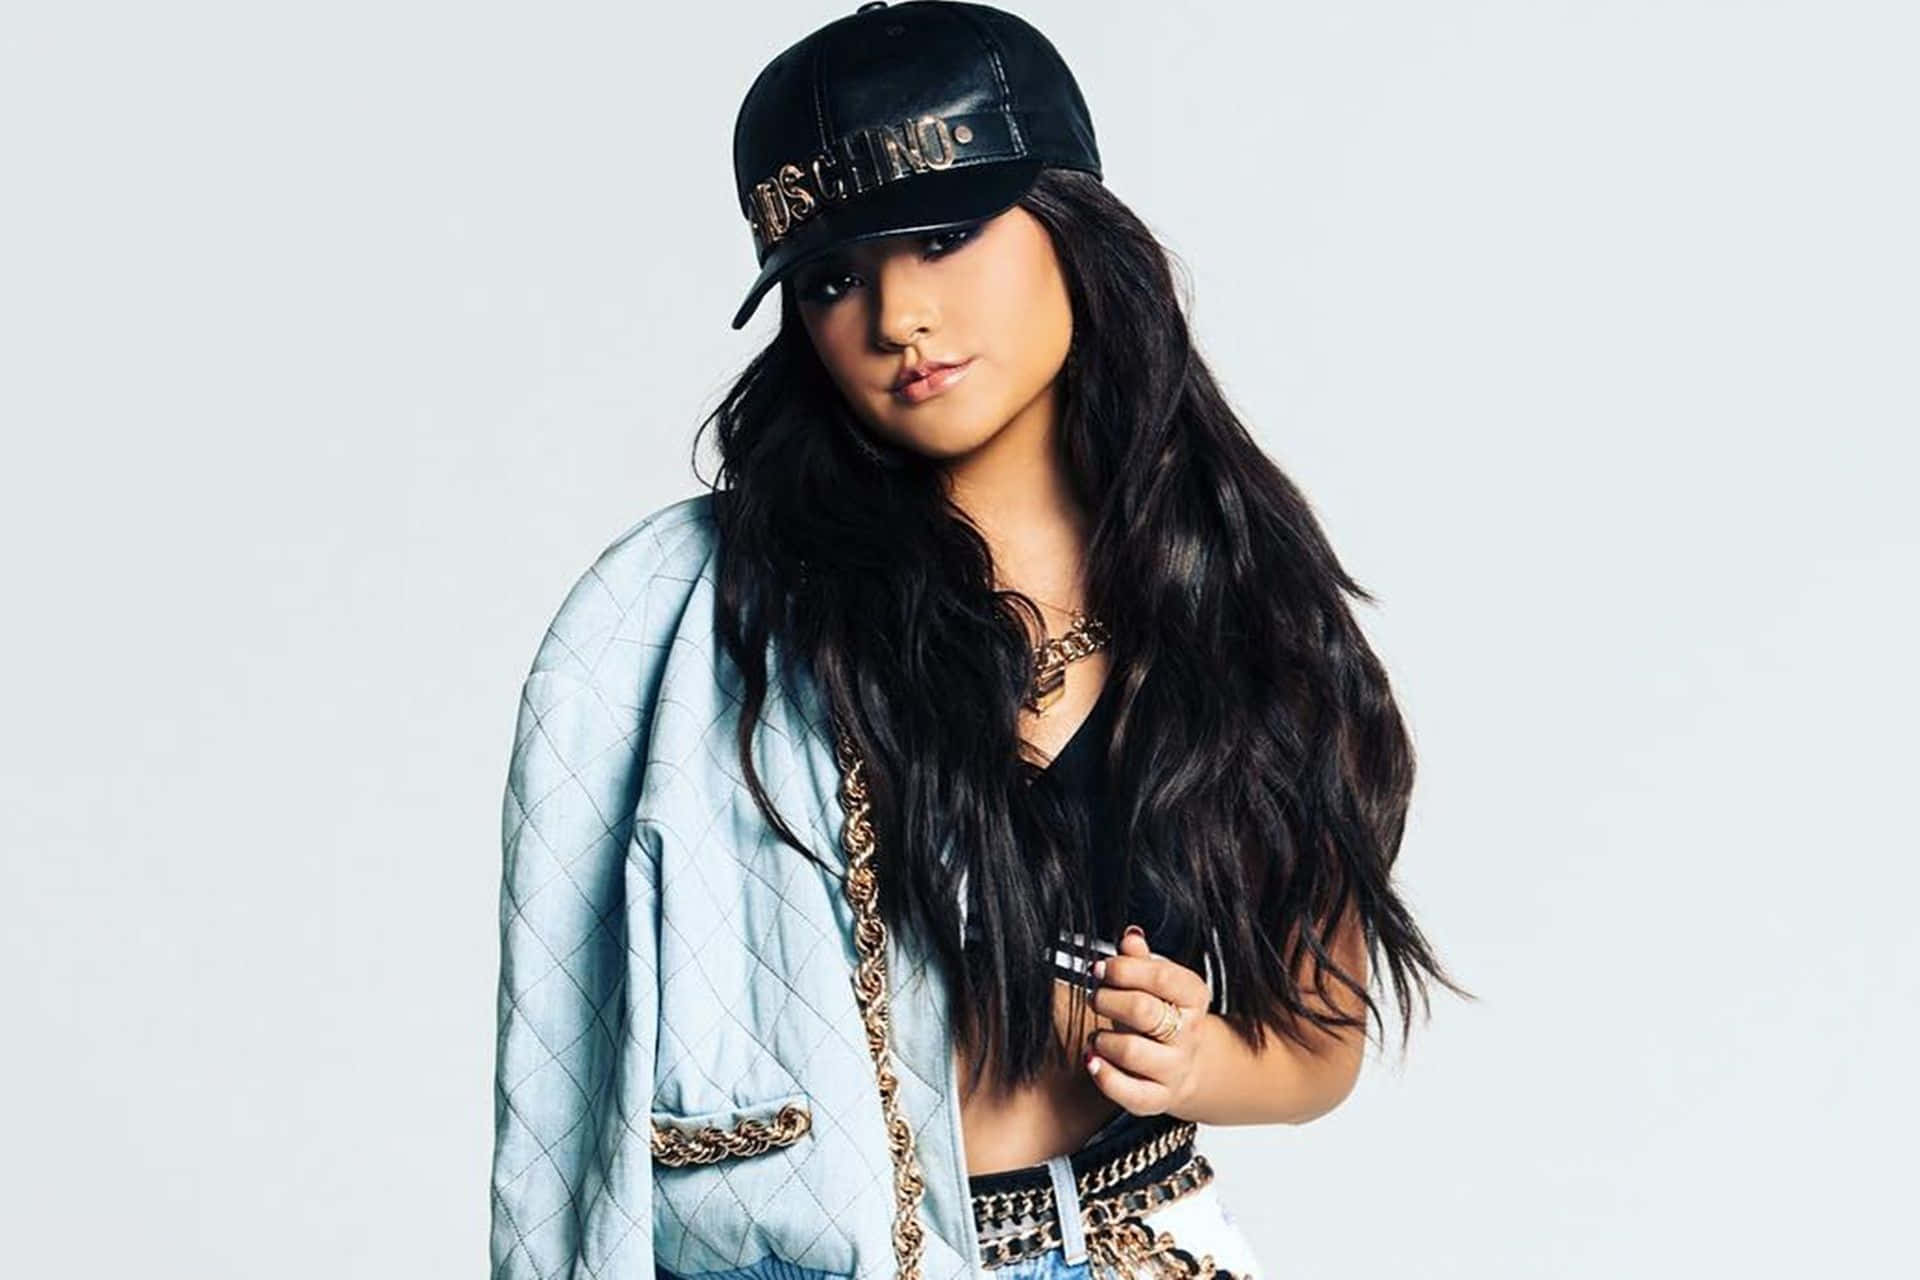 "Becky G Posing in Front of a White Background"